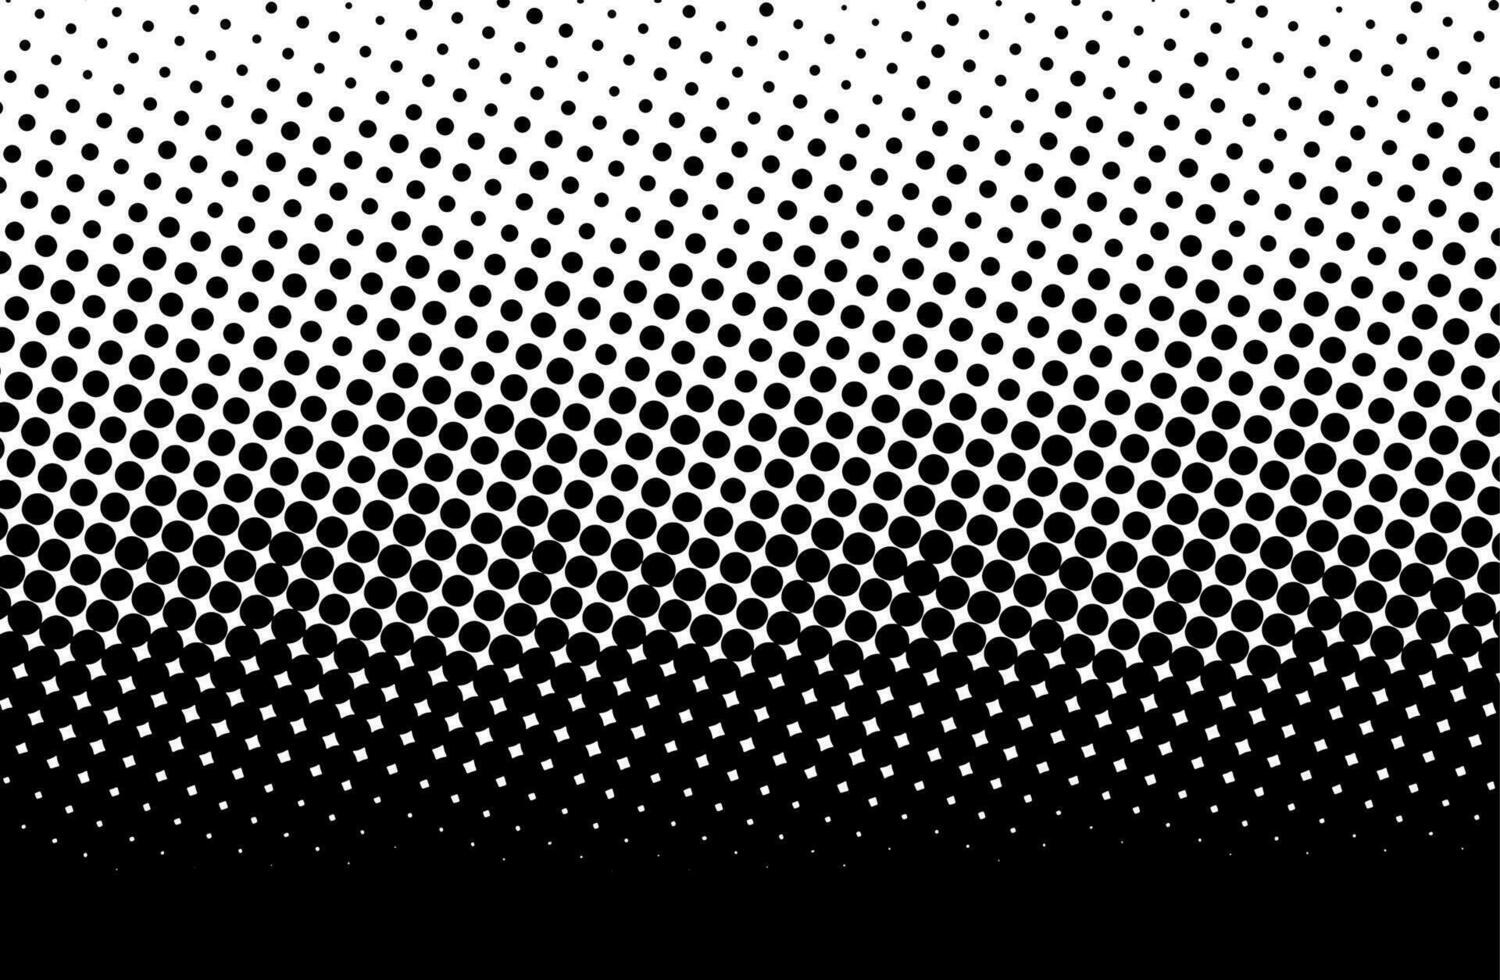 Dot pattern with halftone effect. Black white pop art gradient. Monochrome texture for printing on badges, posters, and business cards. vector